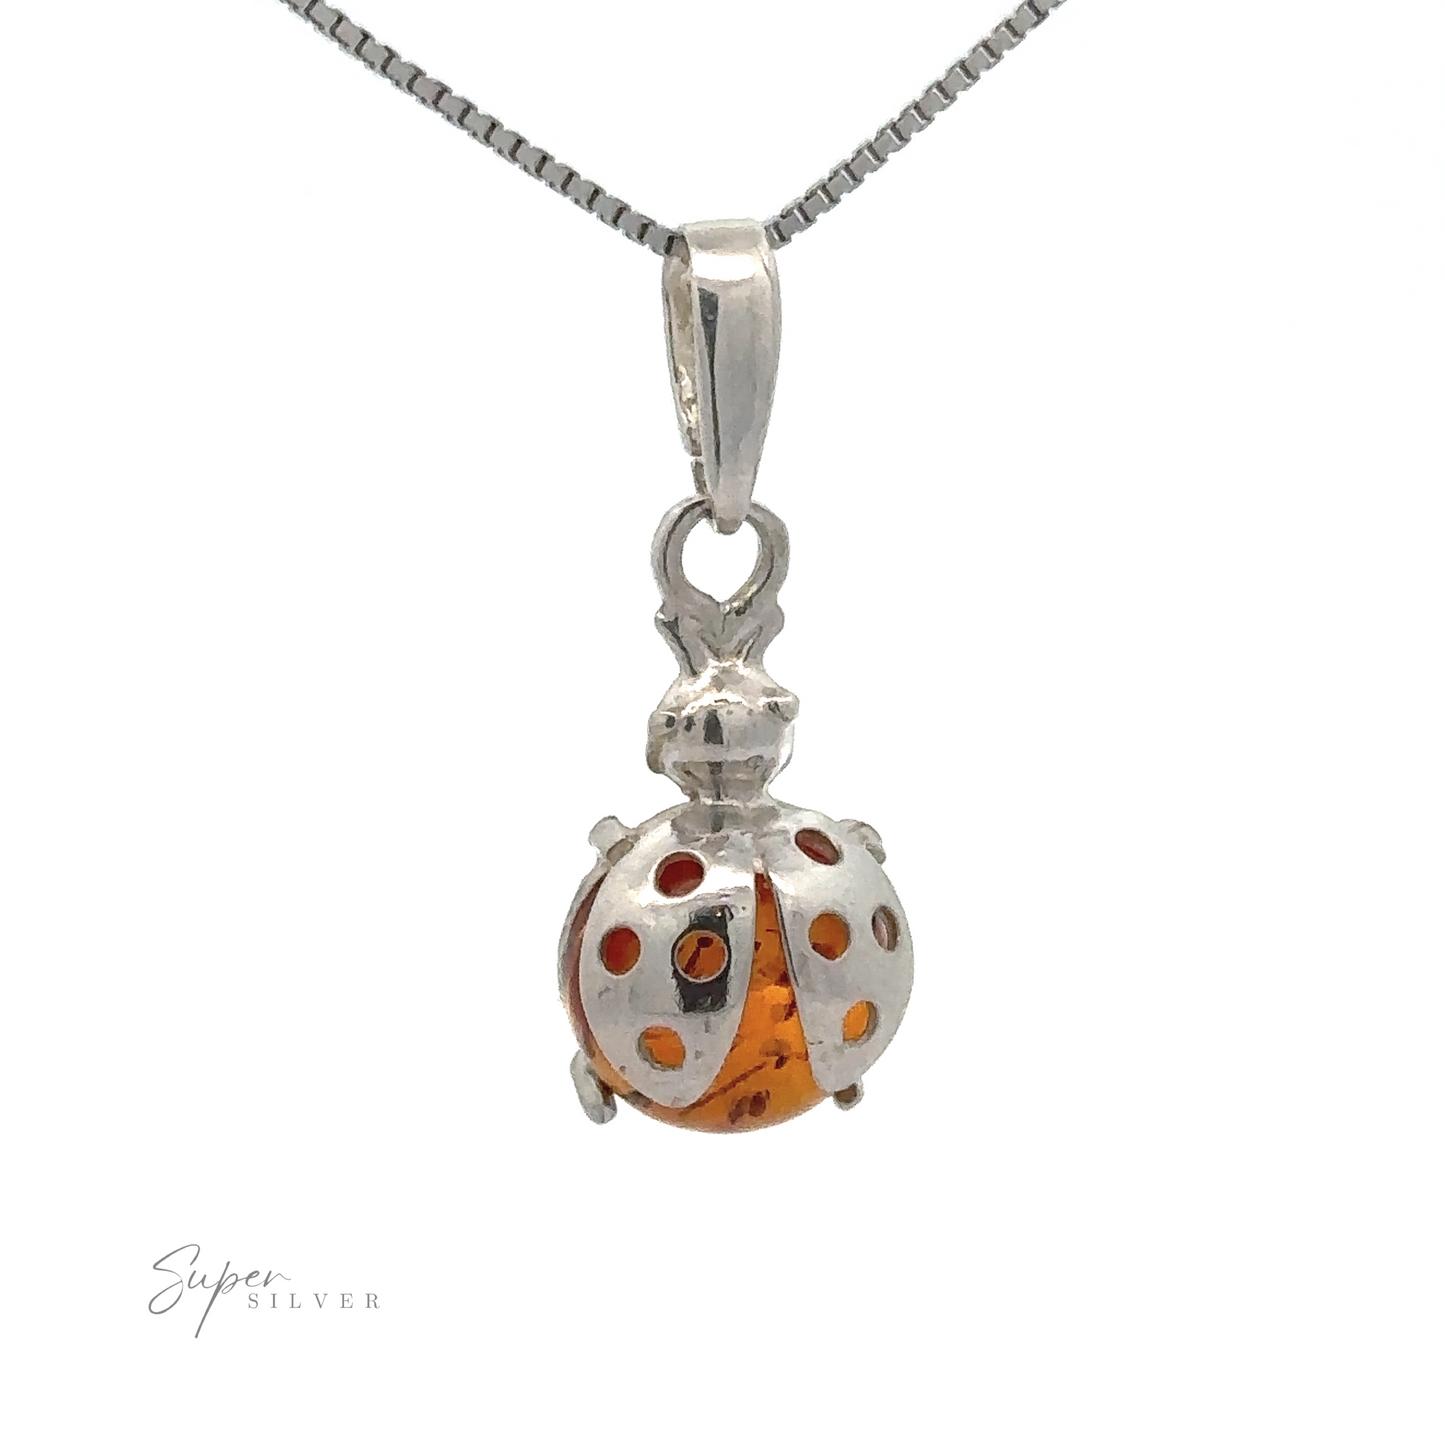 A sterling silver necklace with an Amber Ladybug Pendant, showcasing vibrant red spots and a shimmering cognac Baltic amber body.